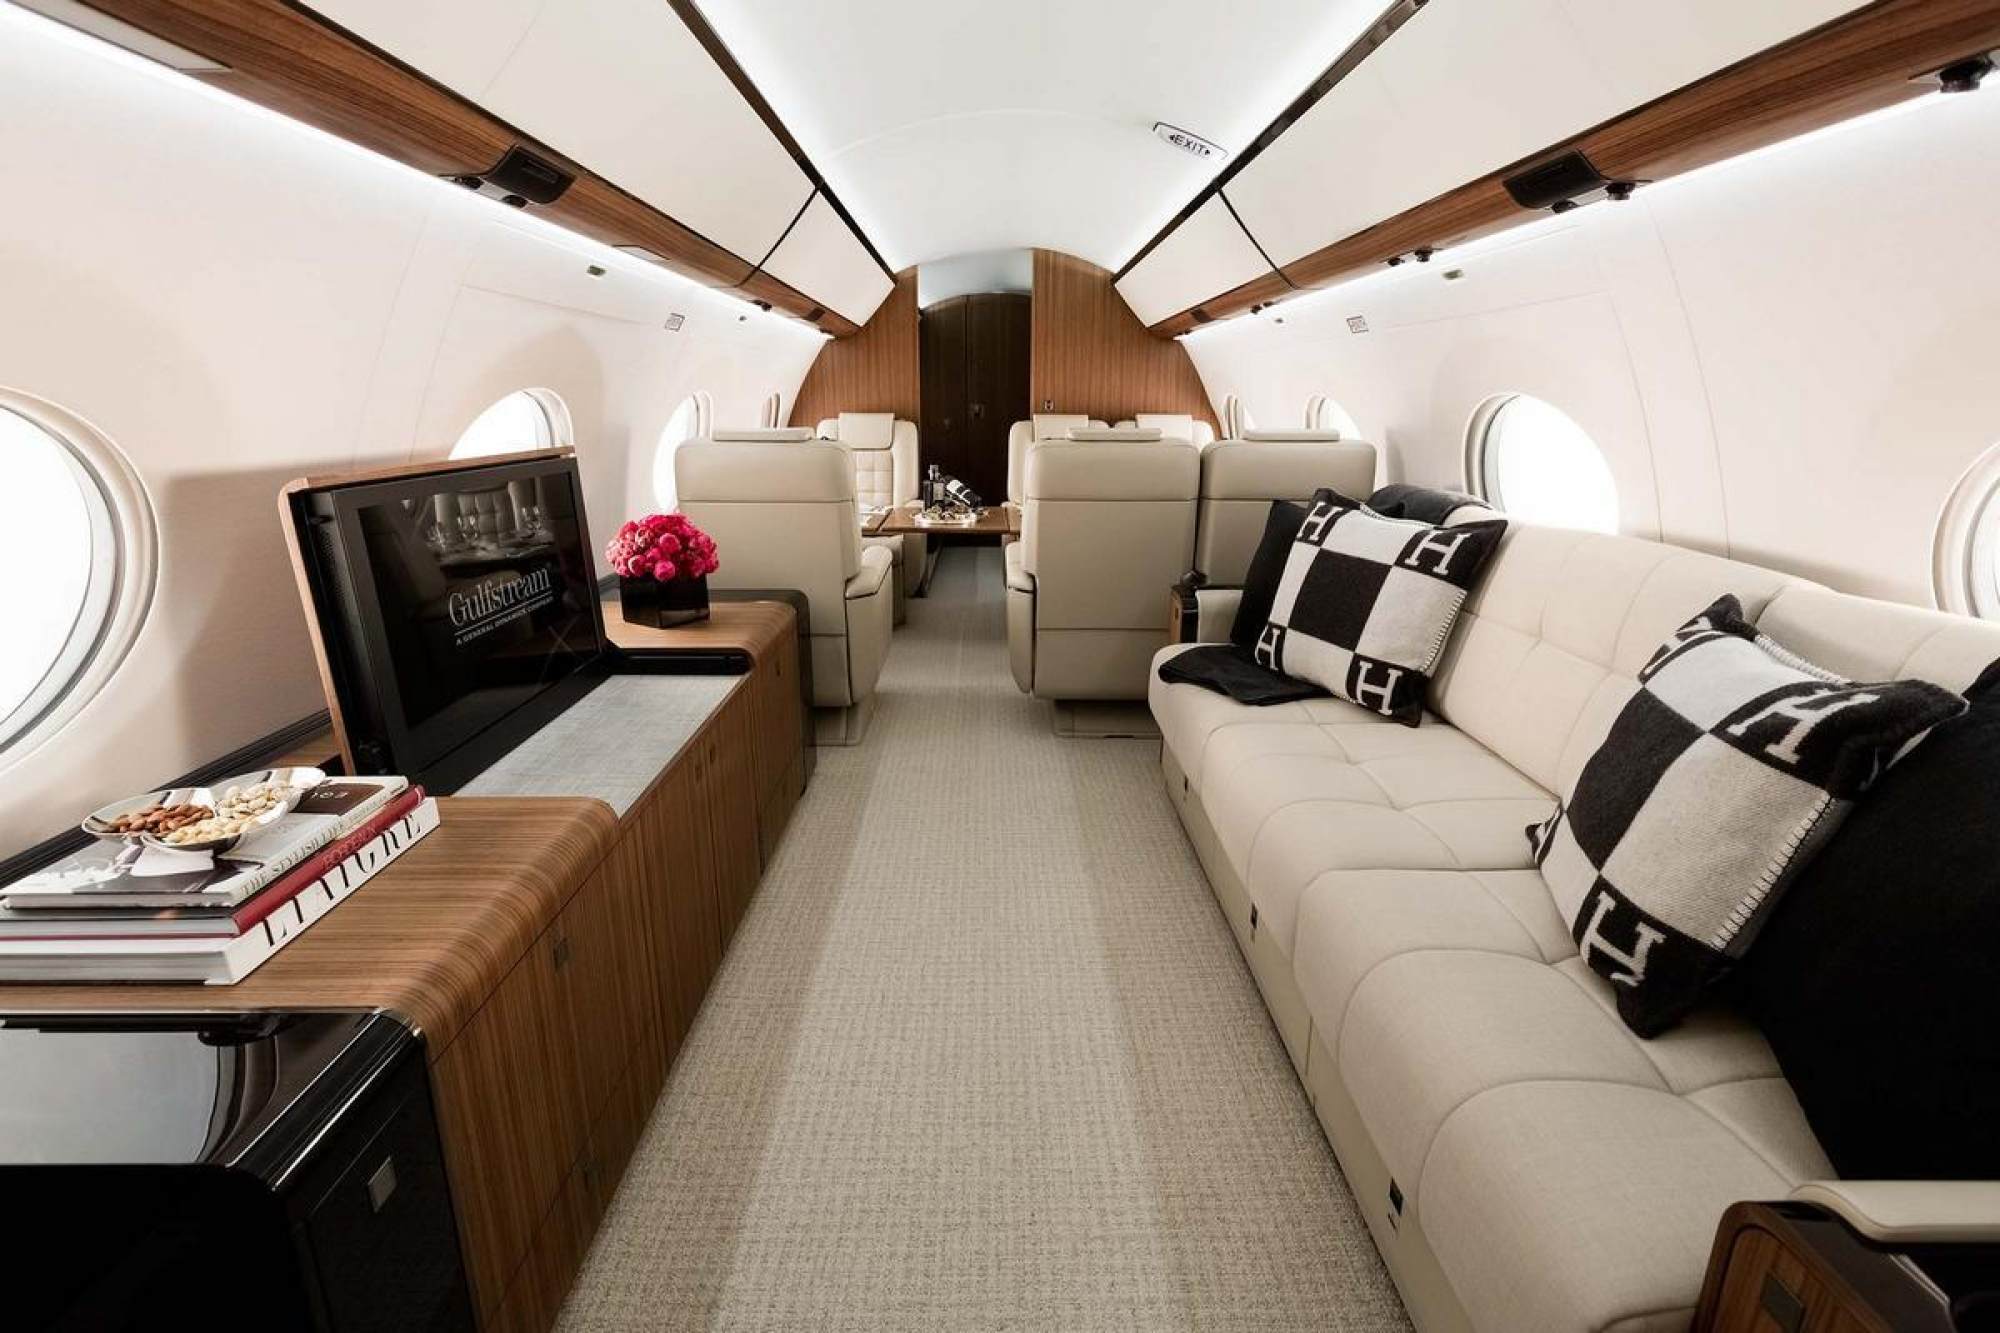 Unbelievable luxury inside the billionaire's $70 million private jet at home rented Elon Musk - Photo 2.